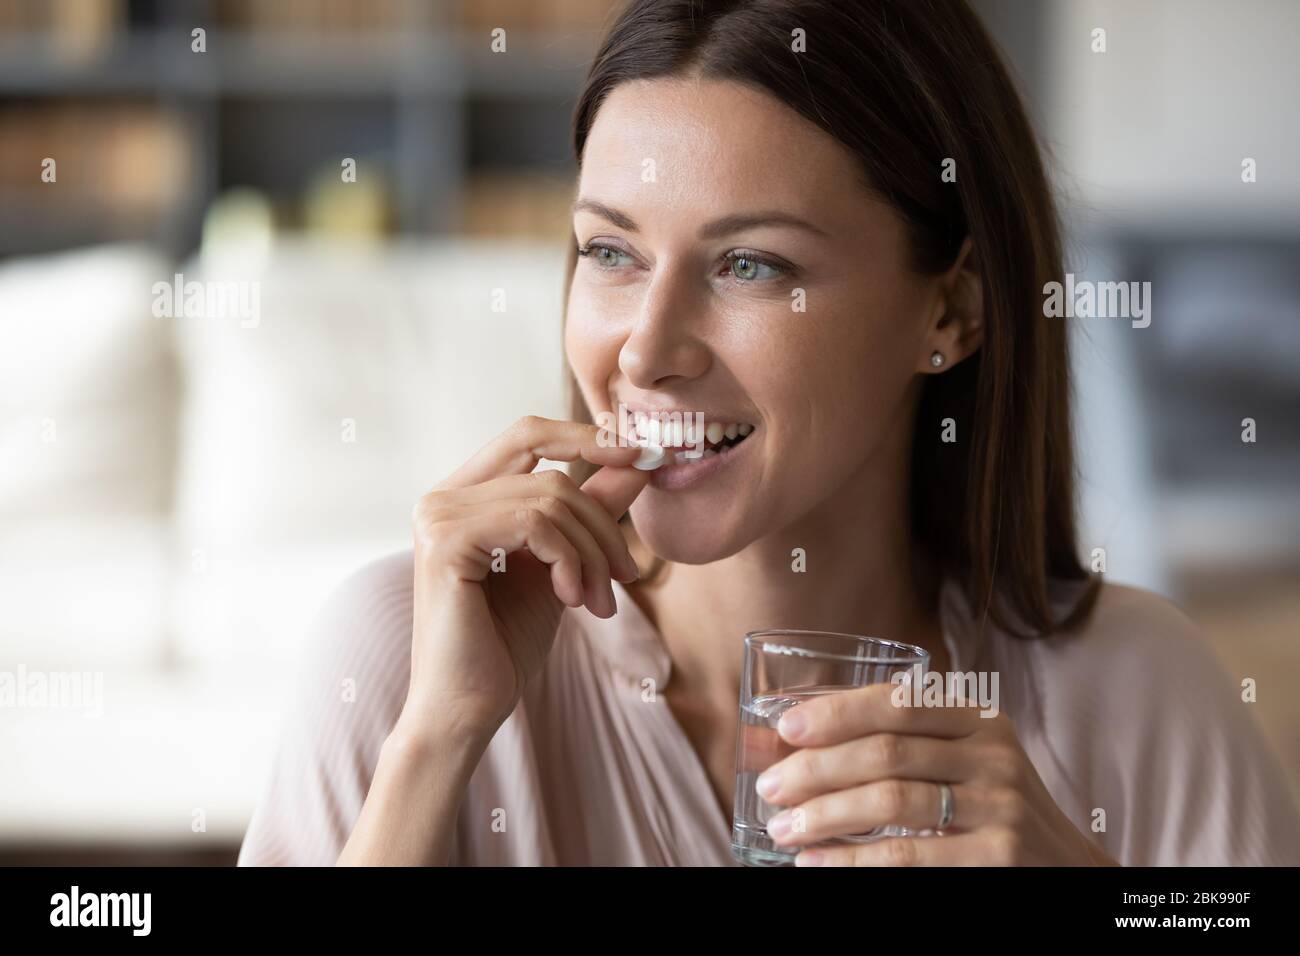 Close up smiling woman taking pill, holding water glass Stock Photo